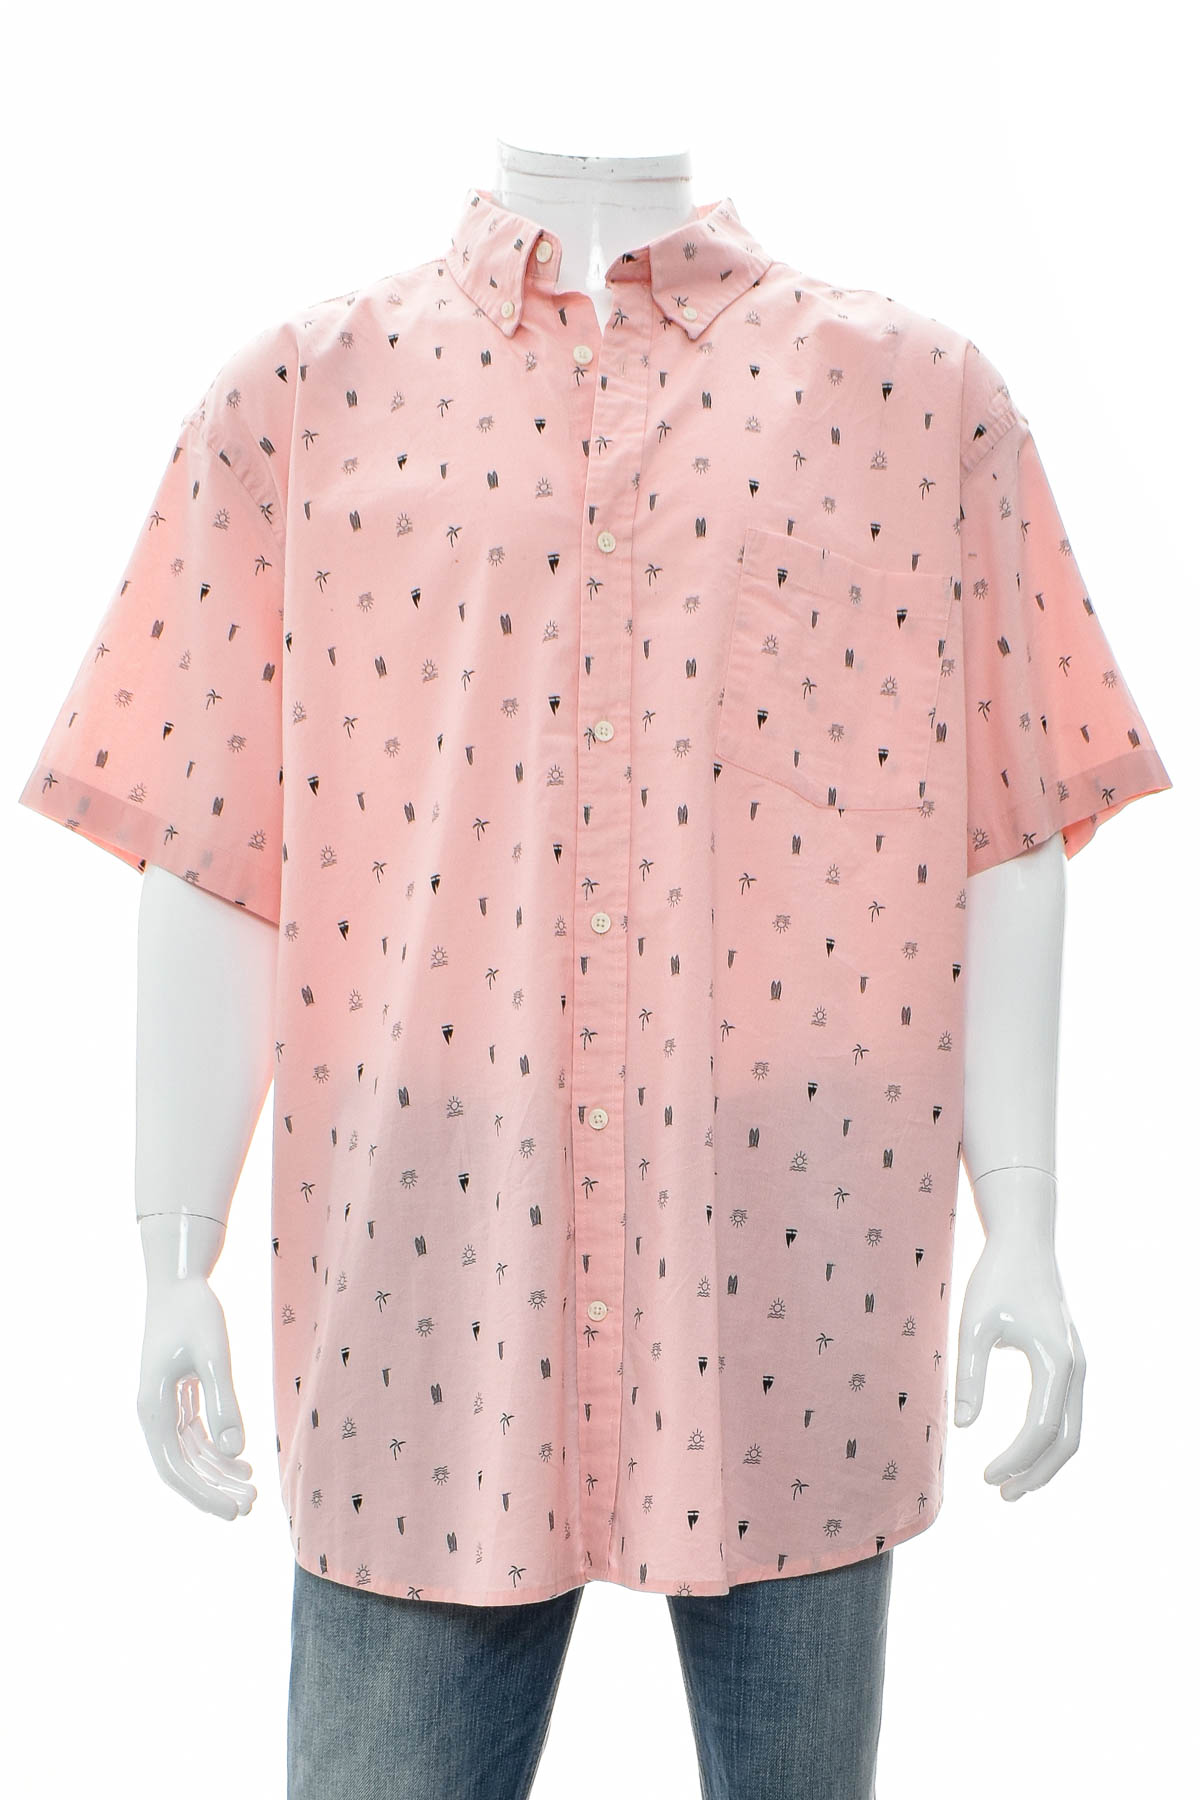 Men's shirt - The FOUNDRY SUPPLY CO. - 0